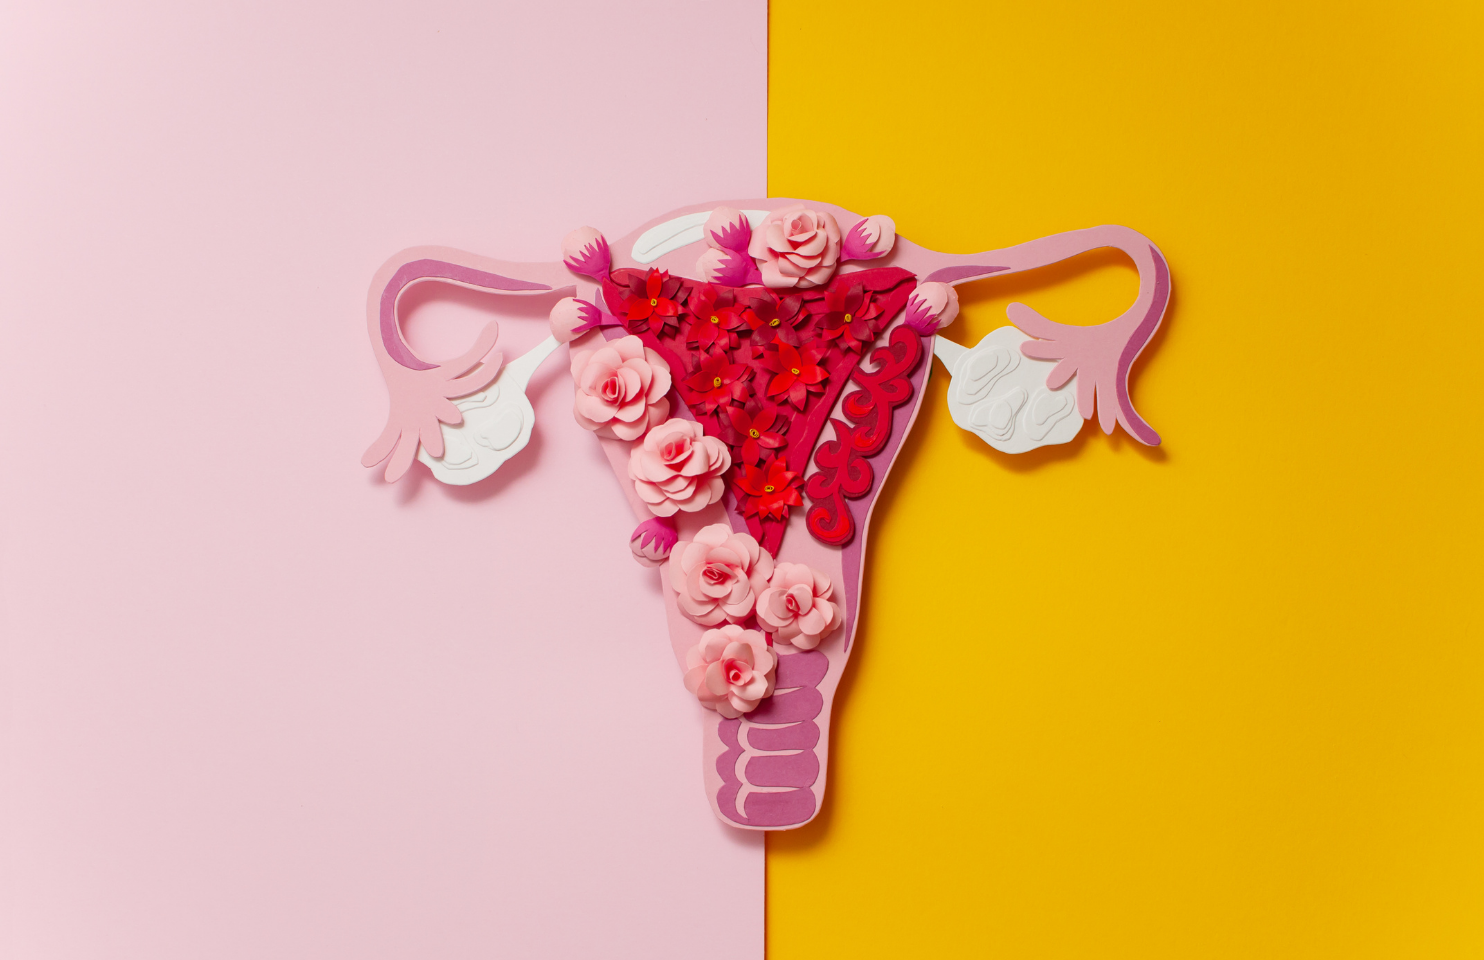 Endometriosis & Infertility How It Causes Infertility and Treatment Options